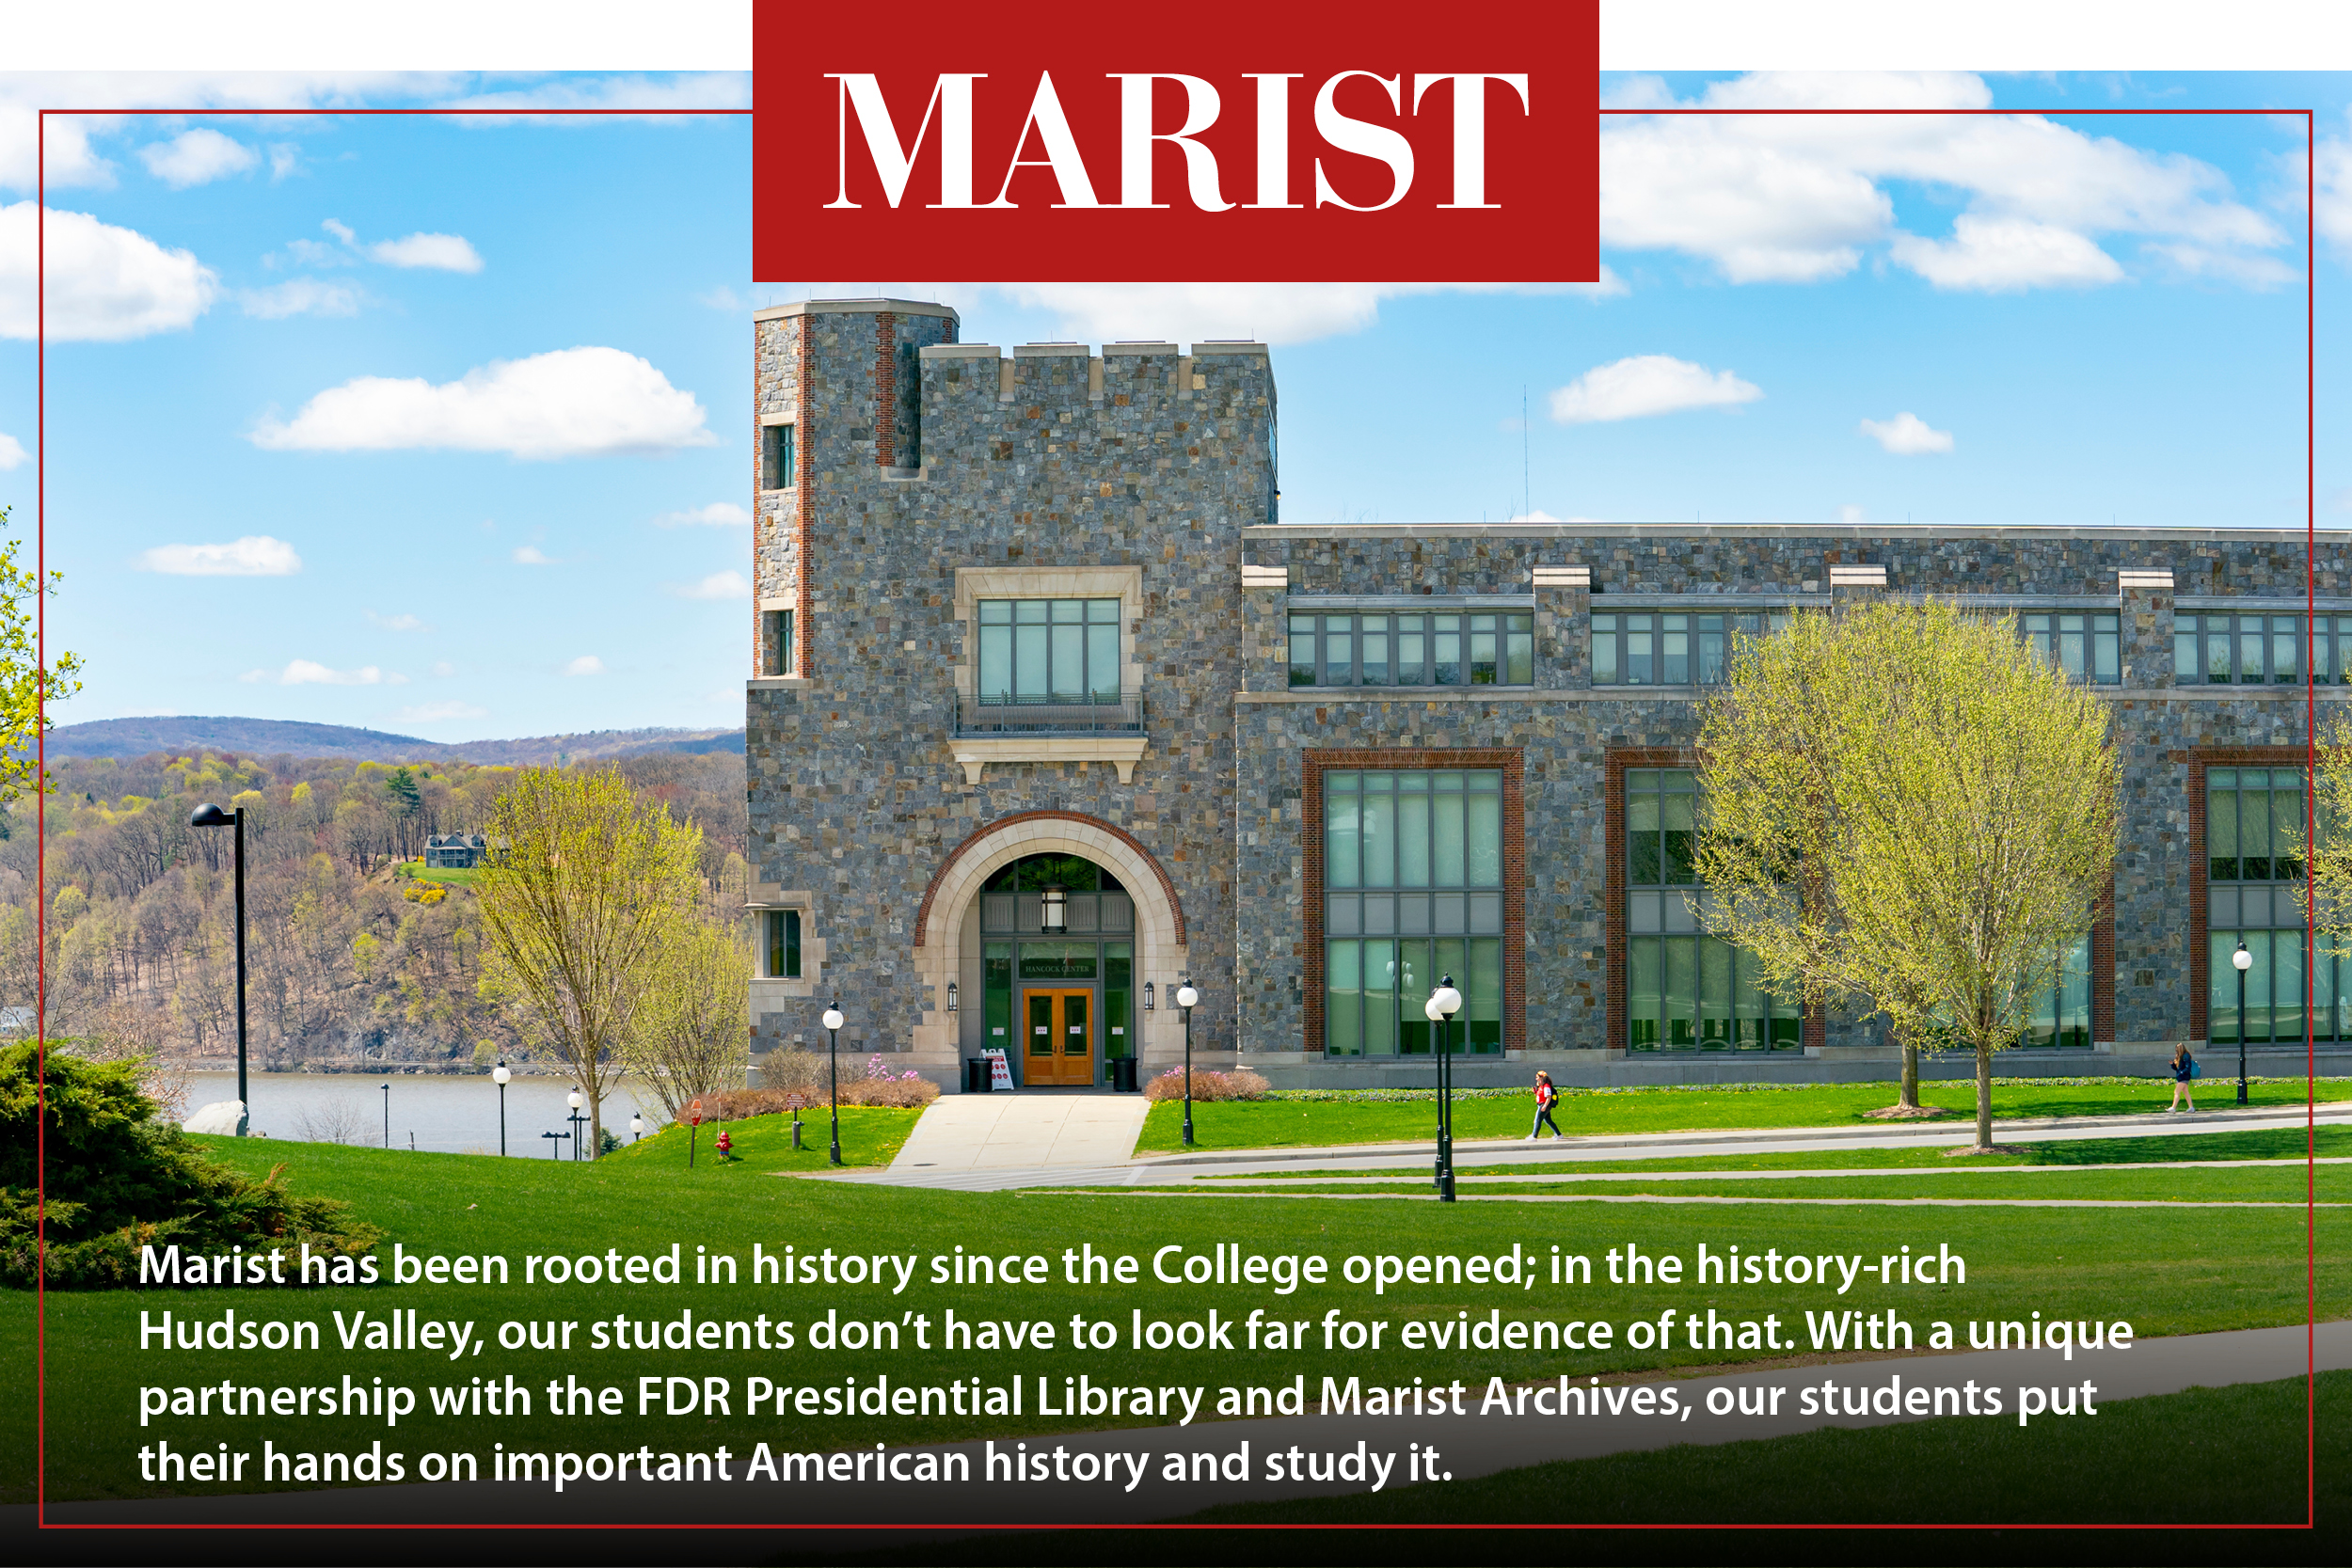 Marist has been rooted in history since the College opened; in the history-rich Hudson Valley, our students don’t have to look far for evidence of that. With a unique partnership with the FDR Presidential Library and Marist Achieves, our students put their hands on important American history and study it.